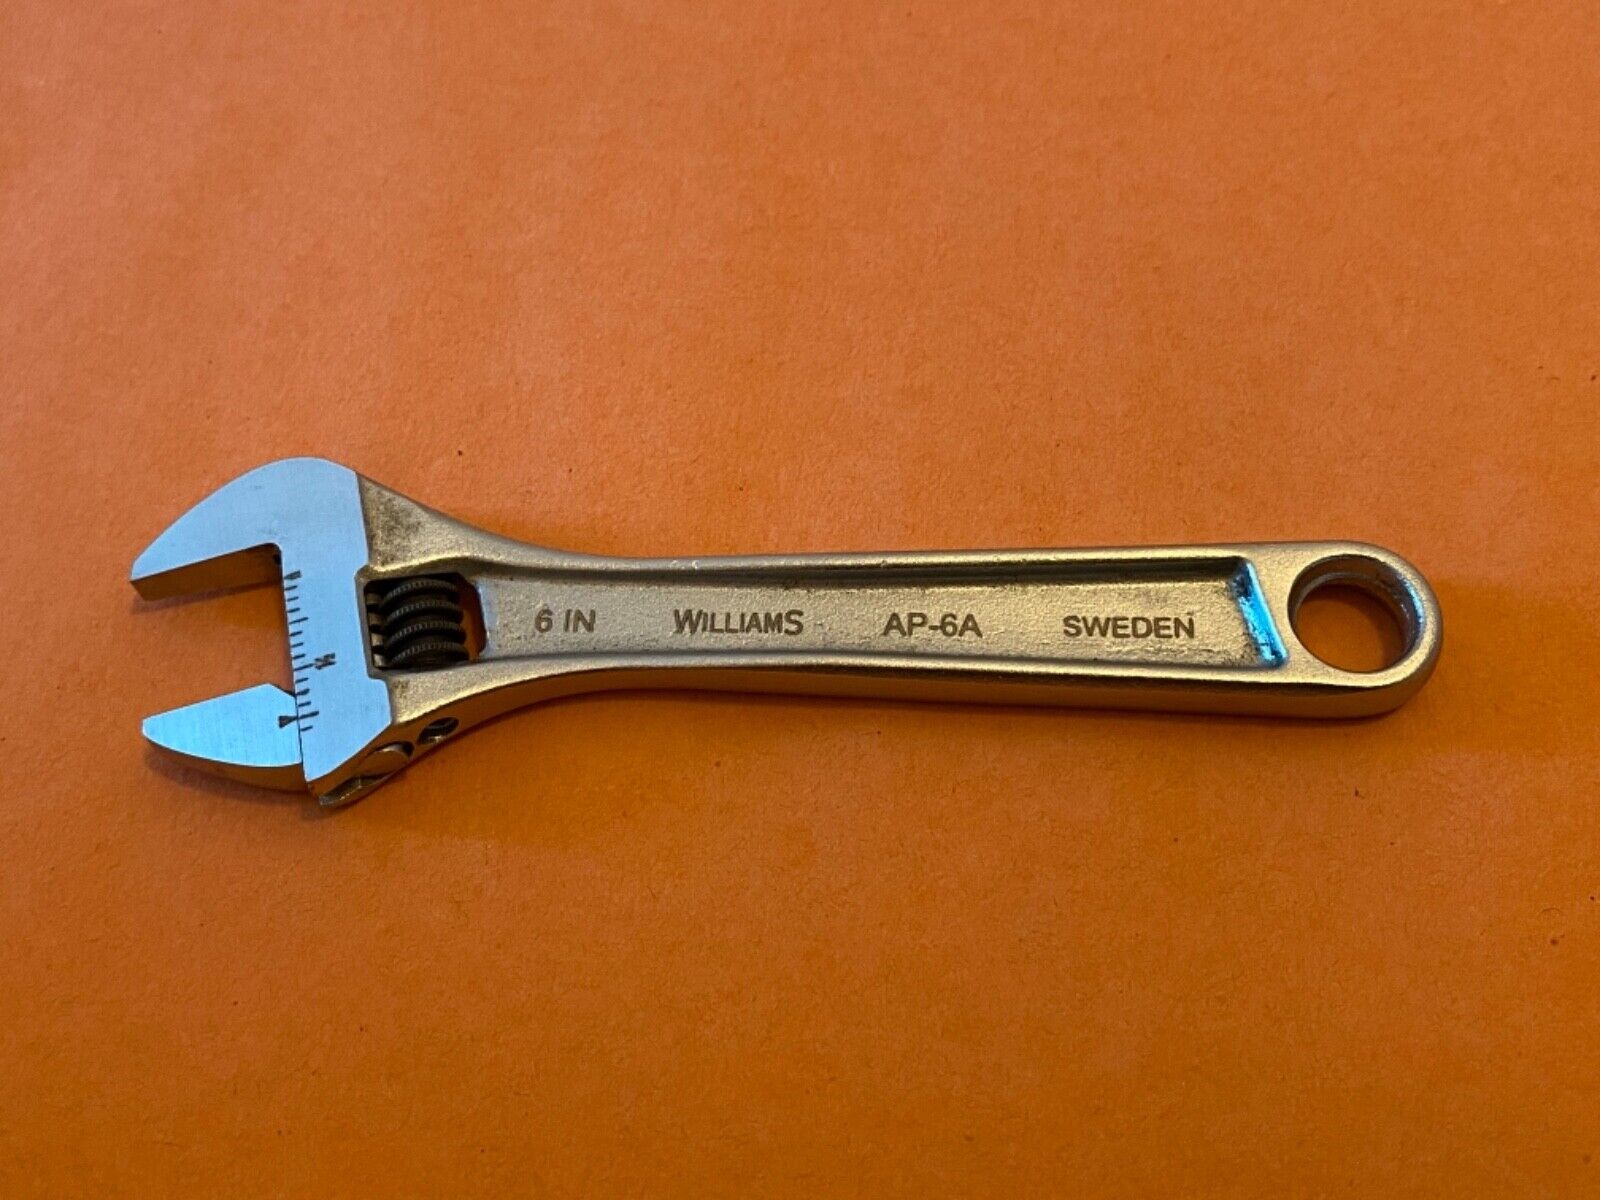 WILLIAMS #AP-6A - 6” ADJUSTABLE WRENCH W/SCALE - NEW - 